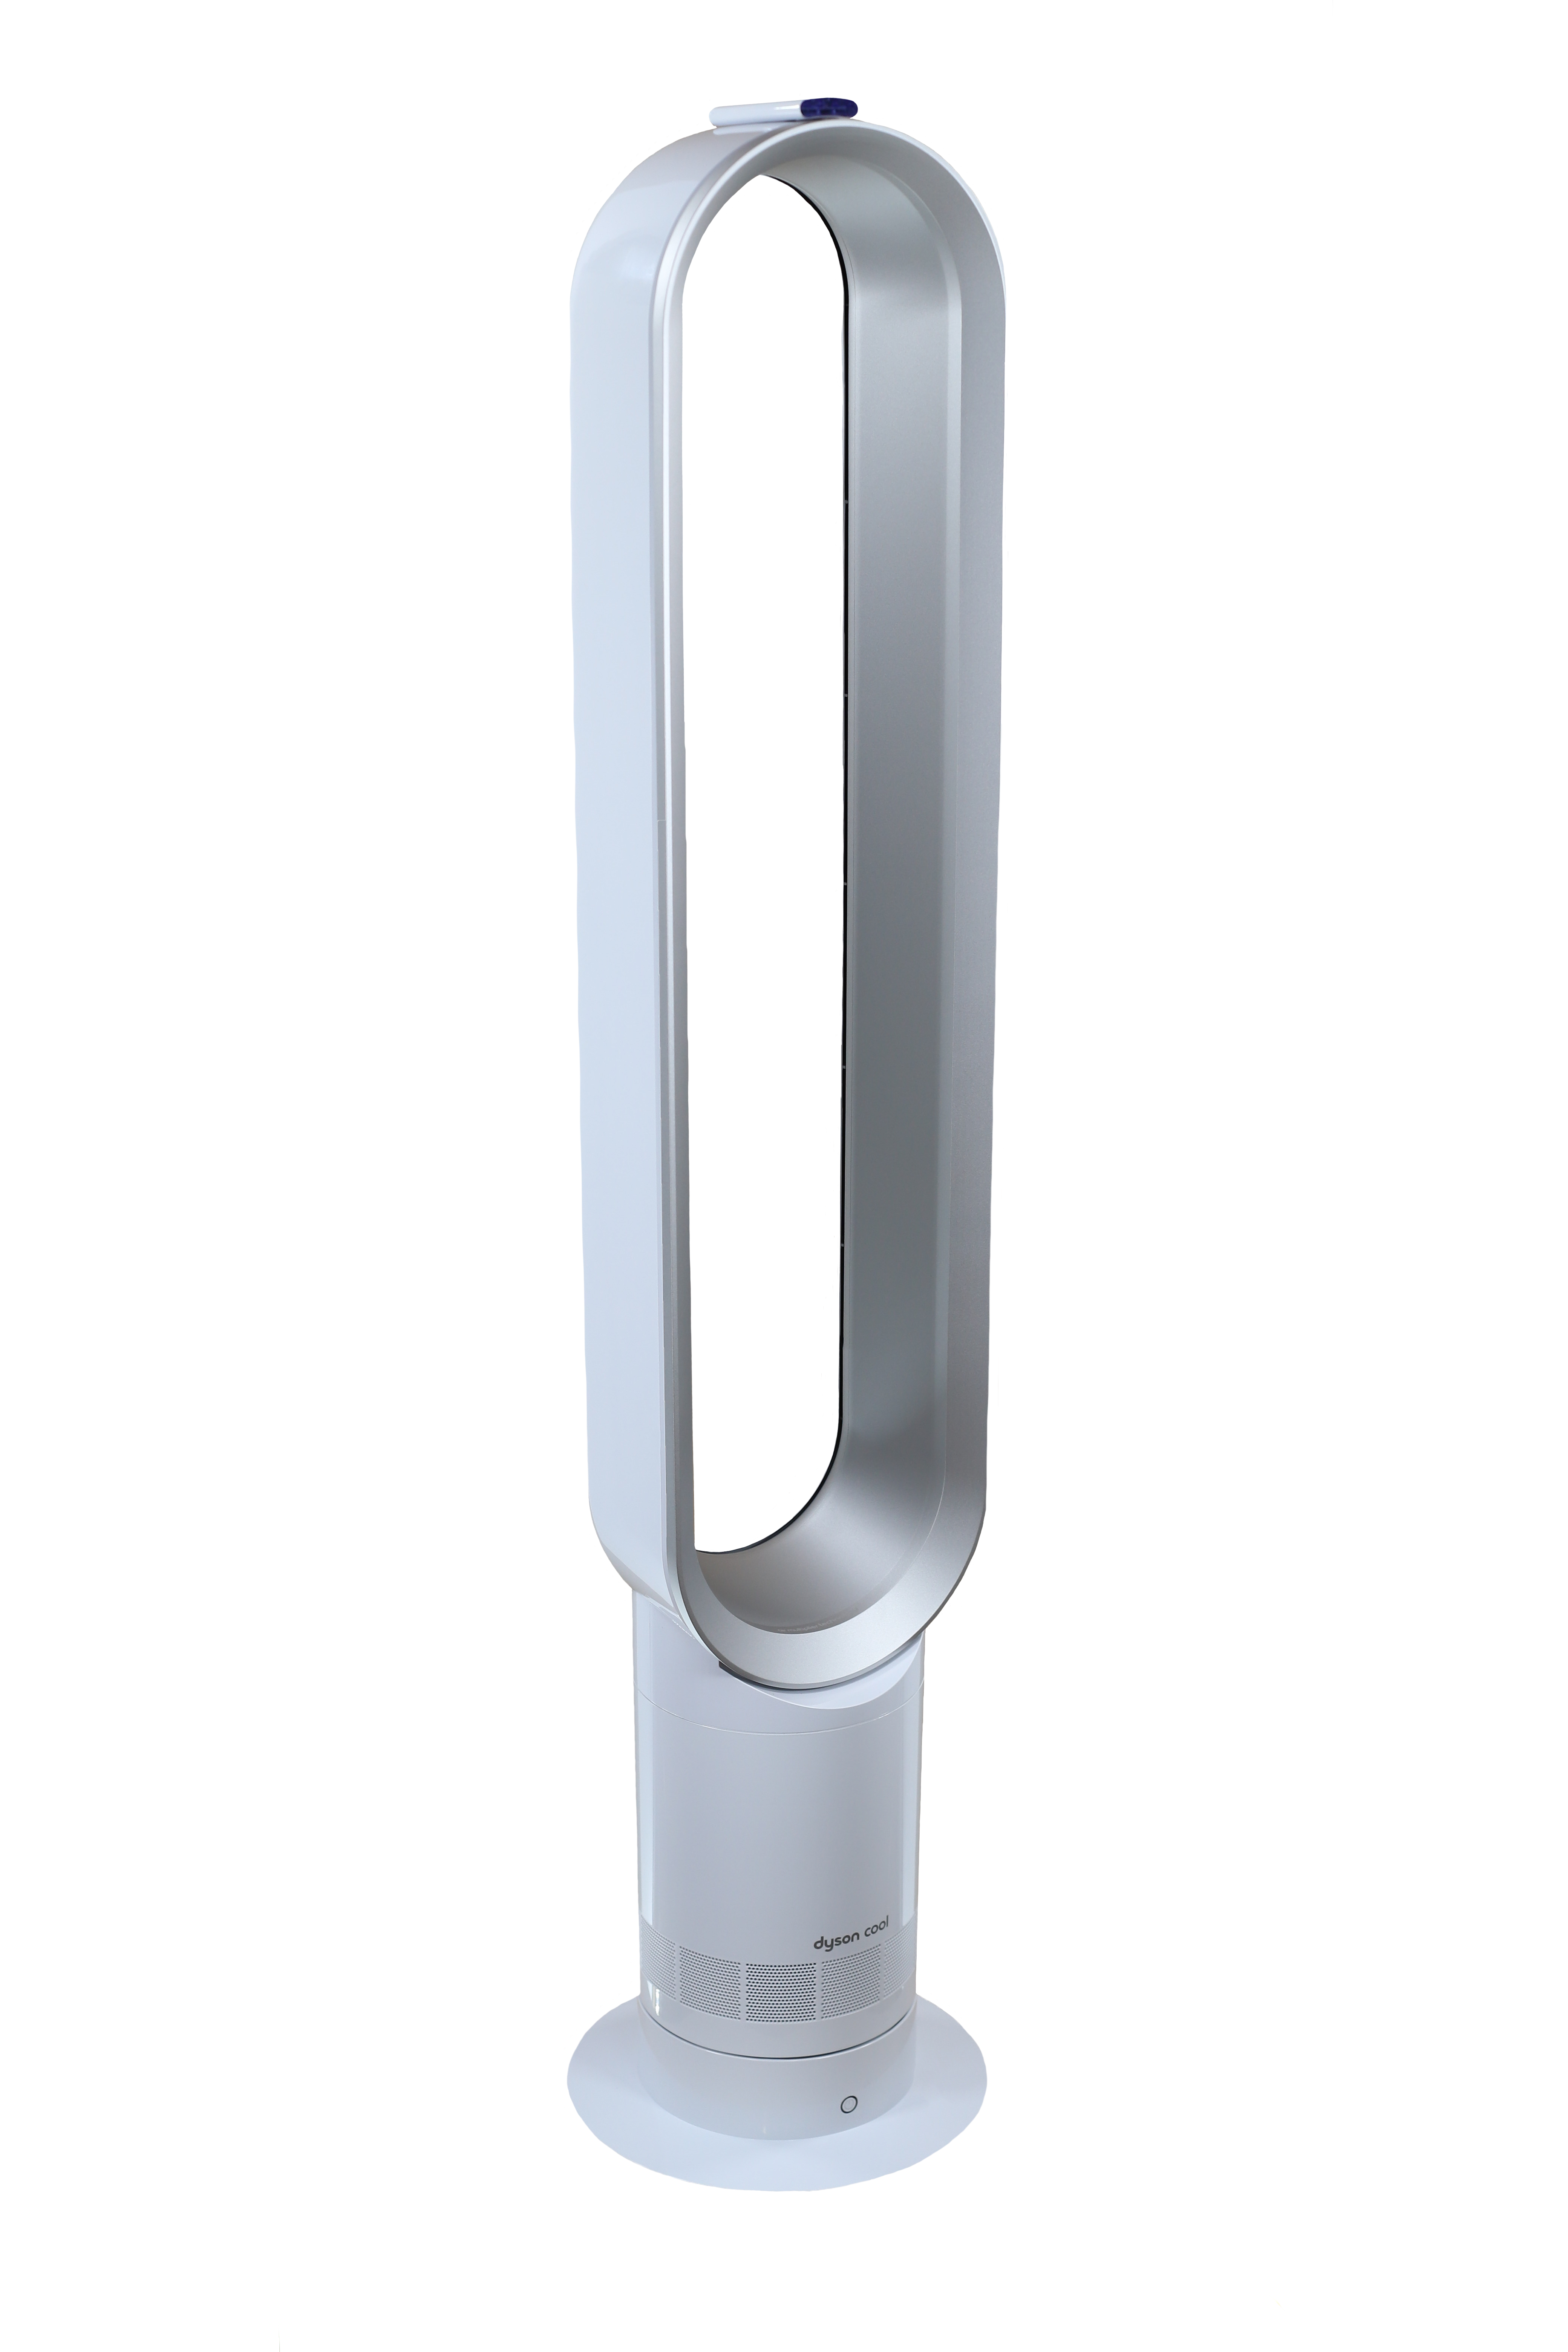 svale Enkelhed jage Rent Dyson Cool Tower Fan AM07 from €19.90 per month